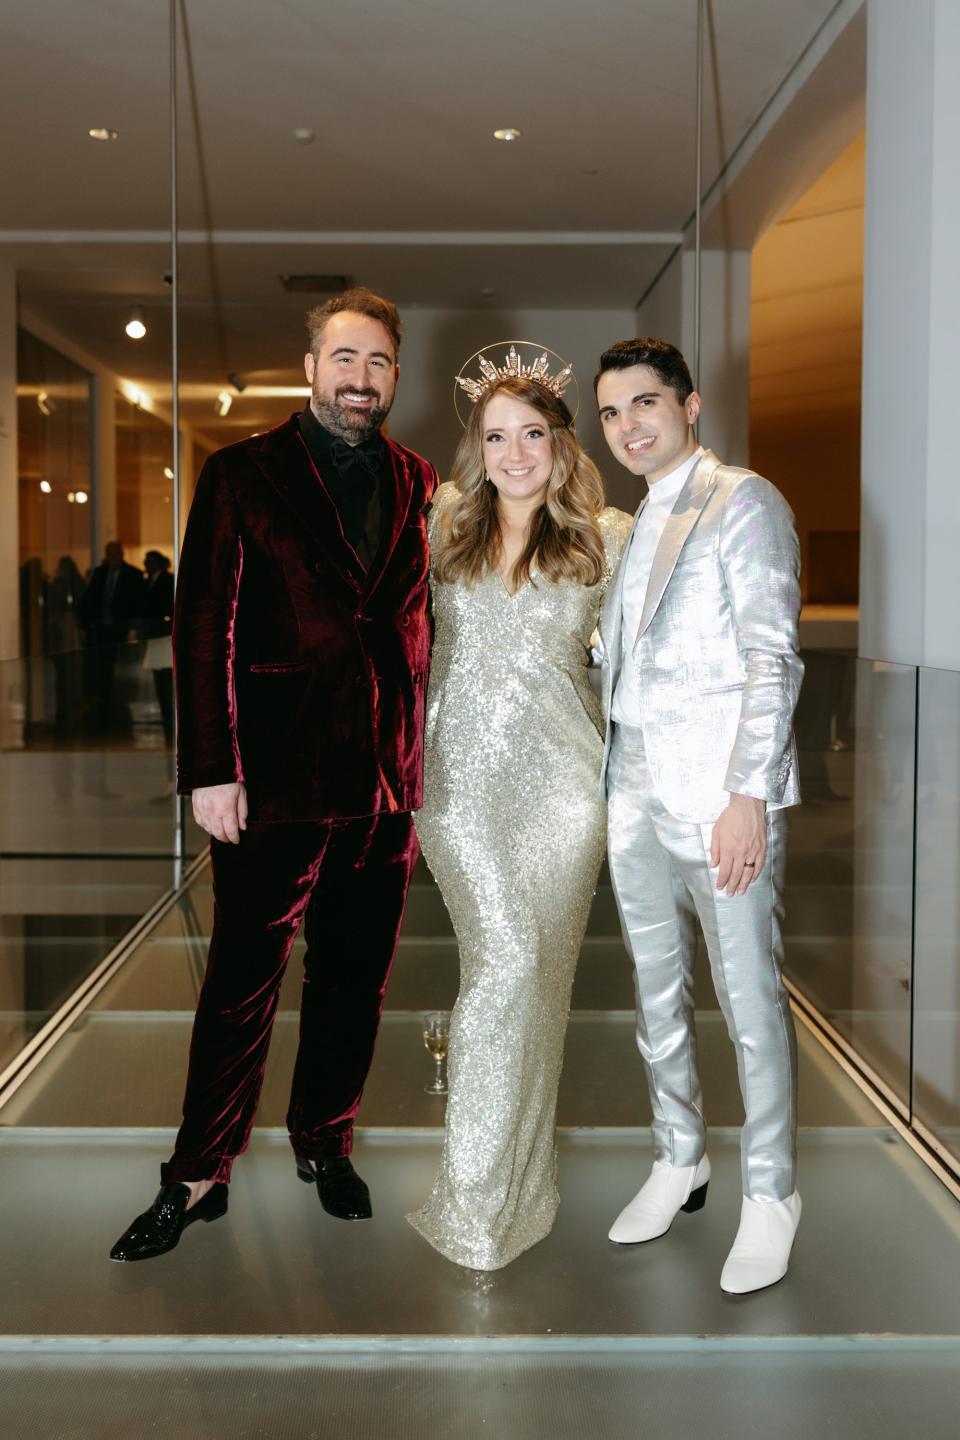 Three people in colorful outfits stand together.